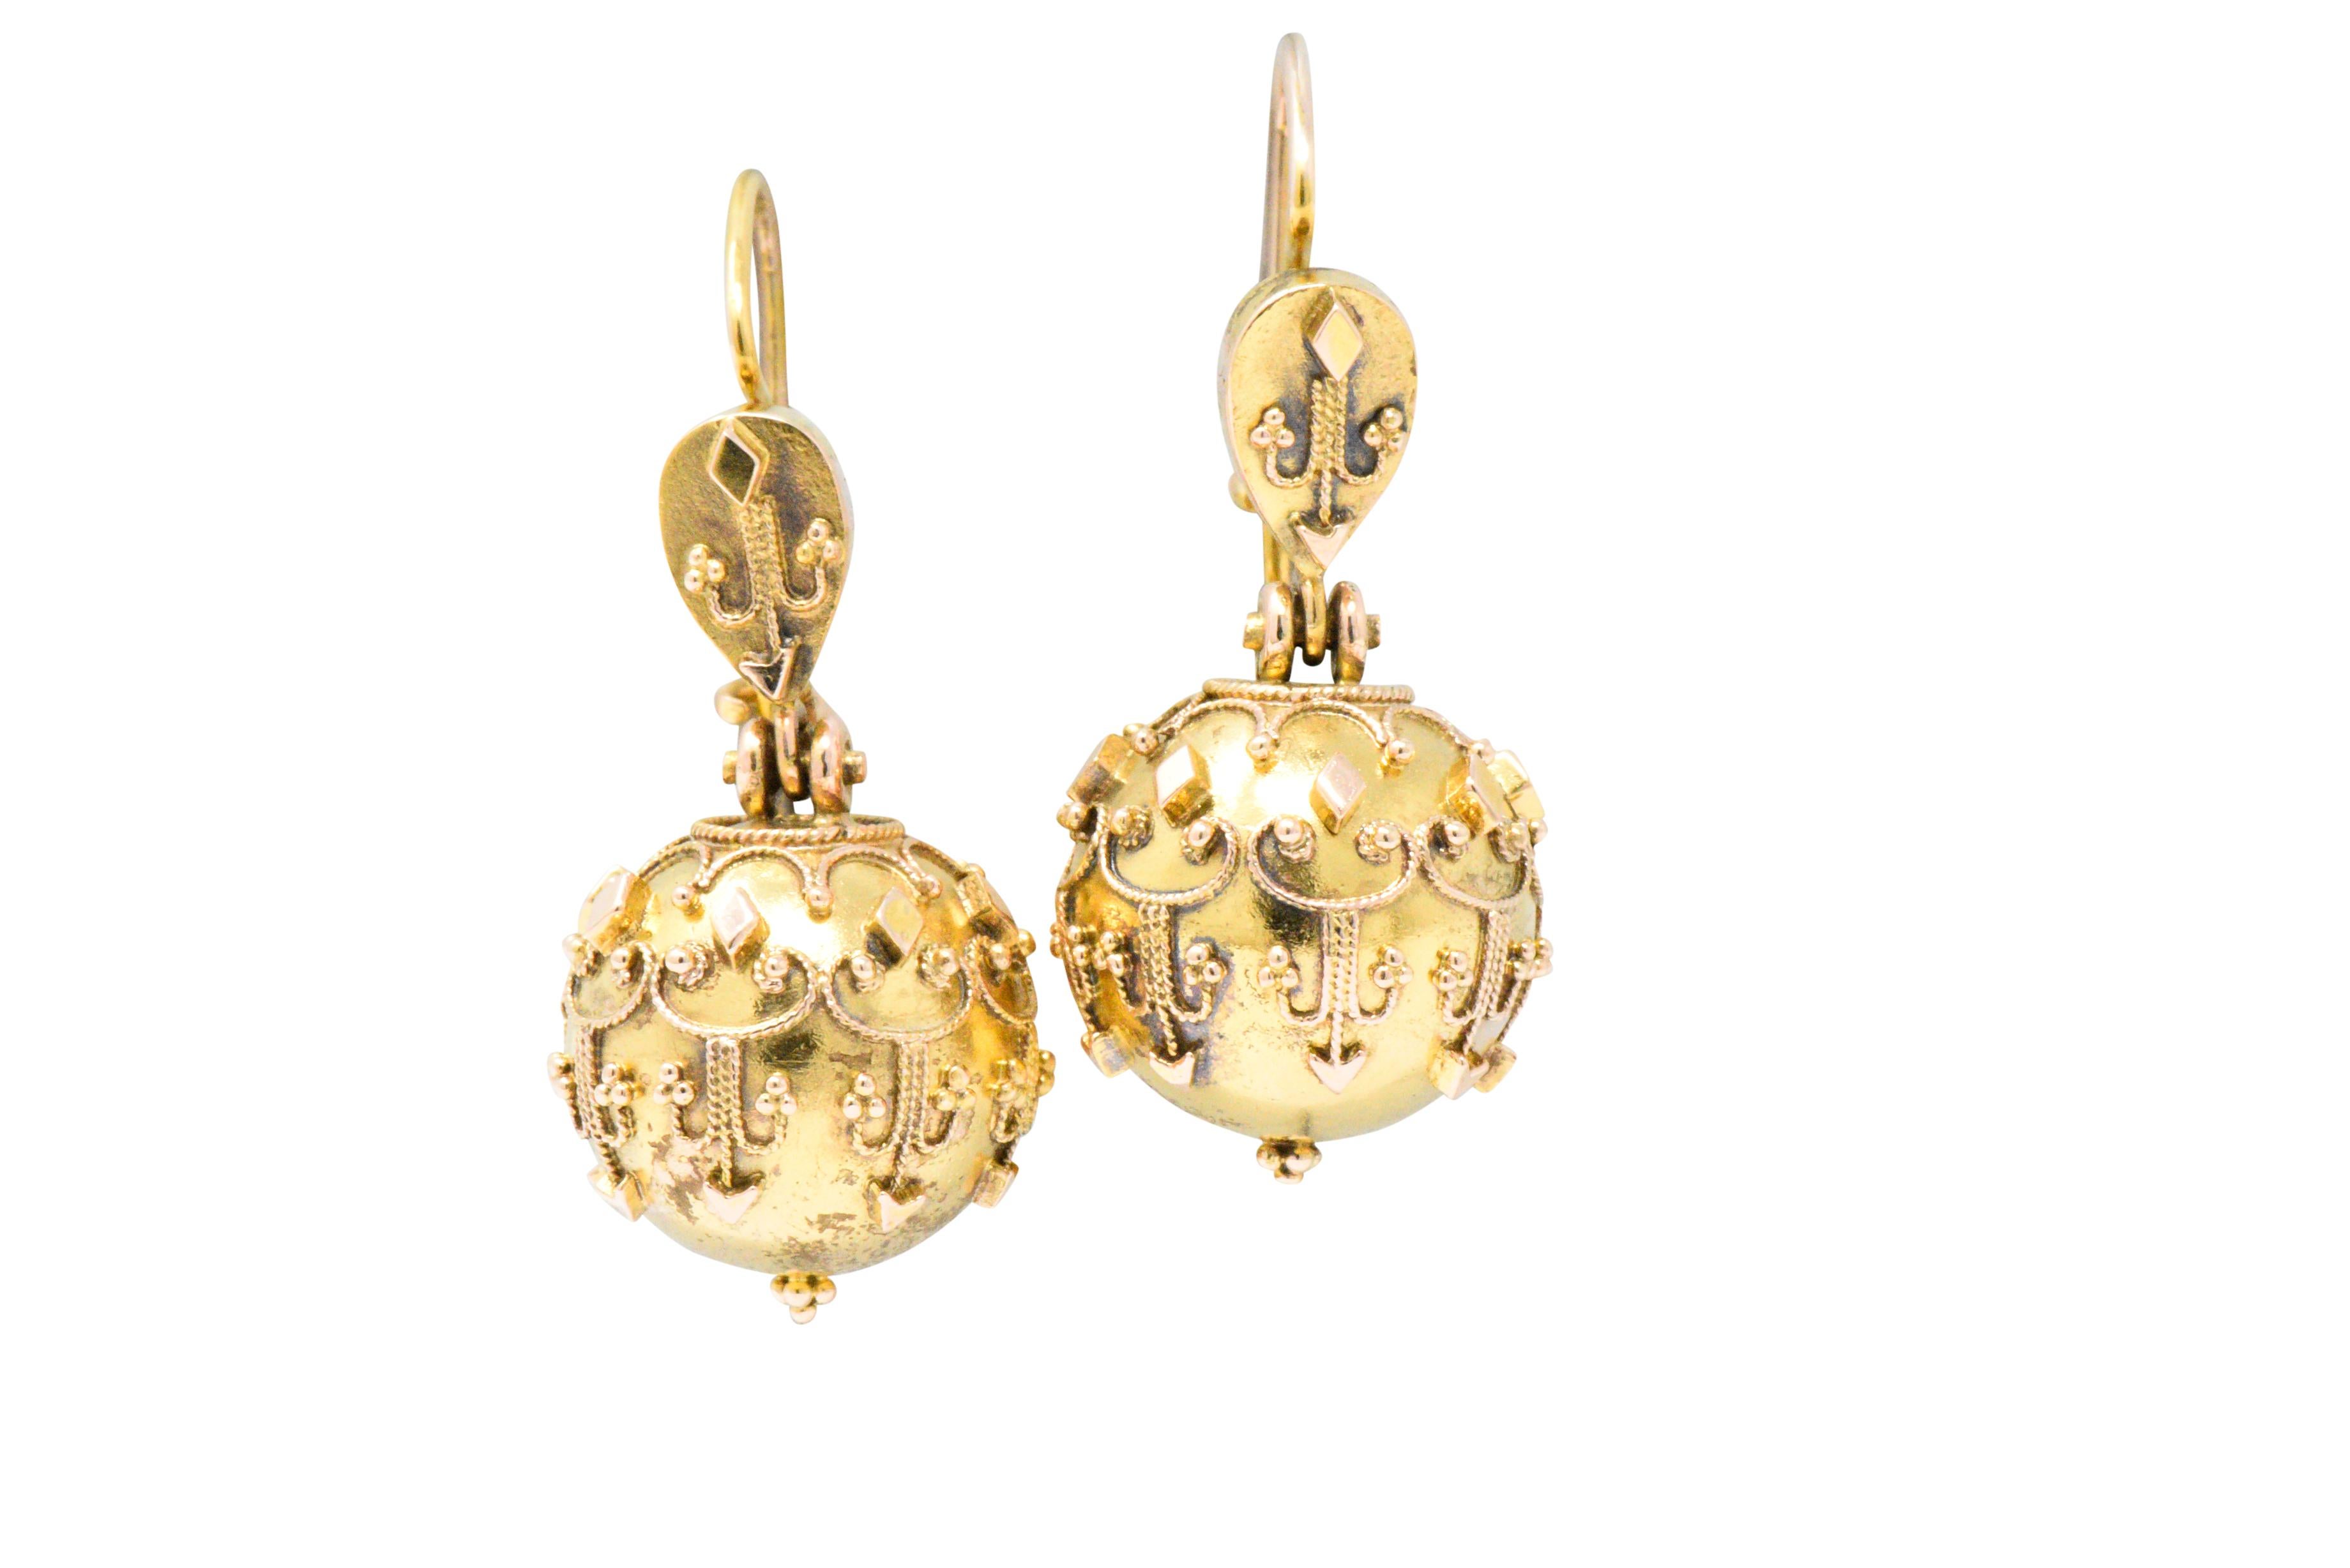 Designed as decorative fluer-de-lis surmounts

Suspending articulated gold spheres with ornate scrolled foliate and applied bead detail 

Completed by hooks with closure

Tested as 14 karat gold

Circa: 1870

Measures: 1/2 x 1 1/4 inches

Total